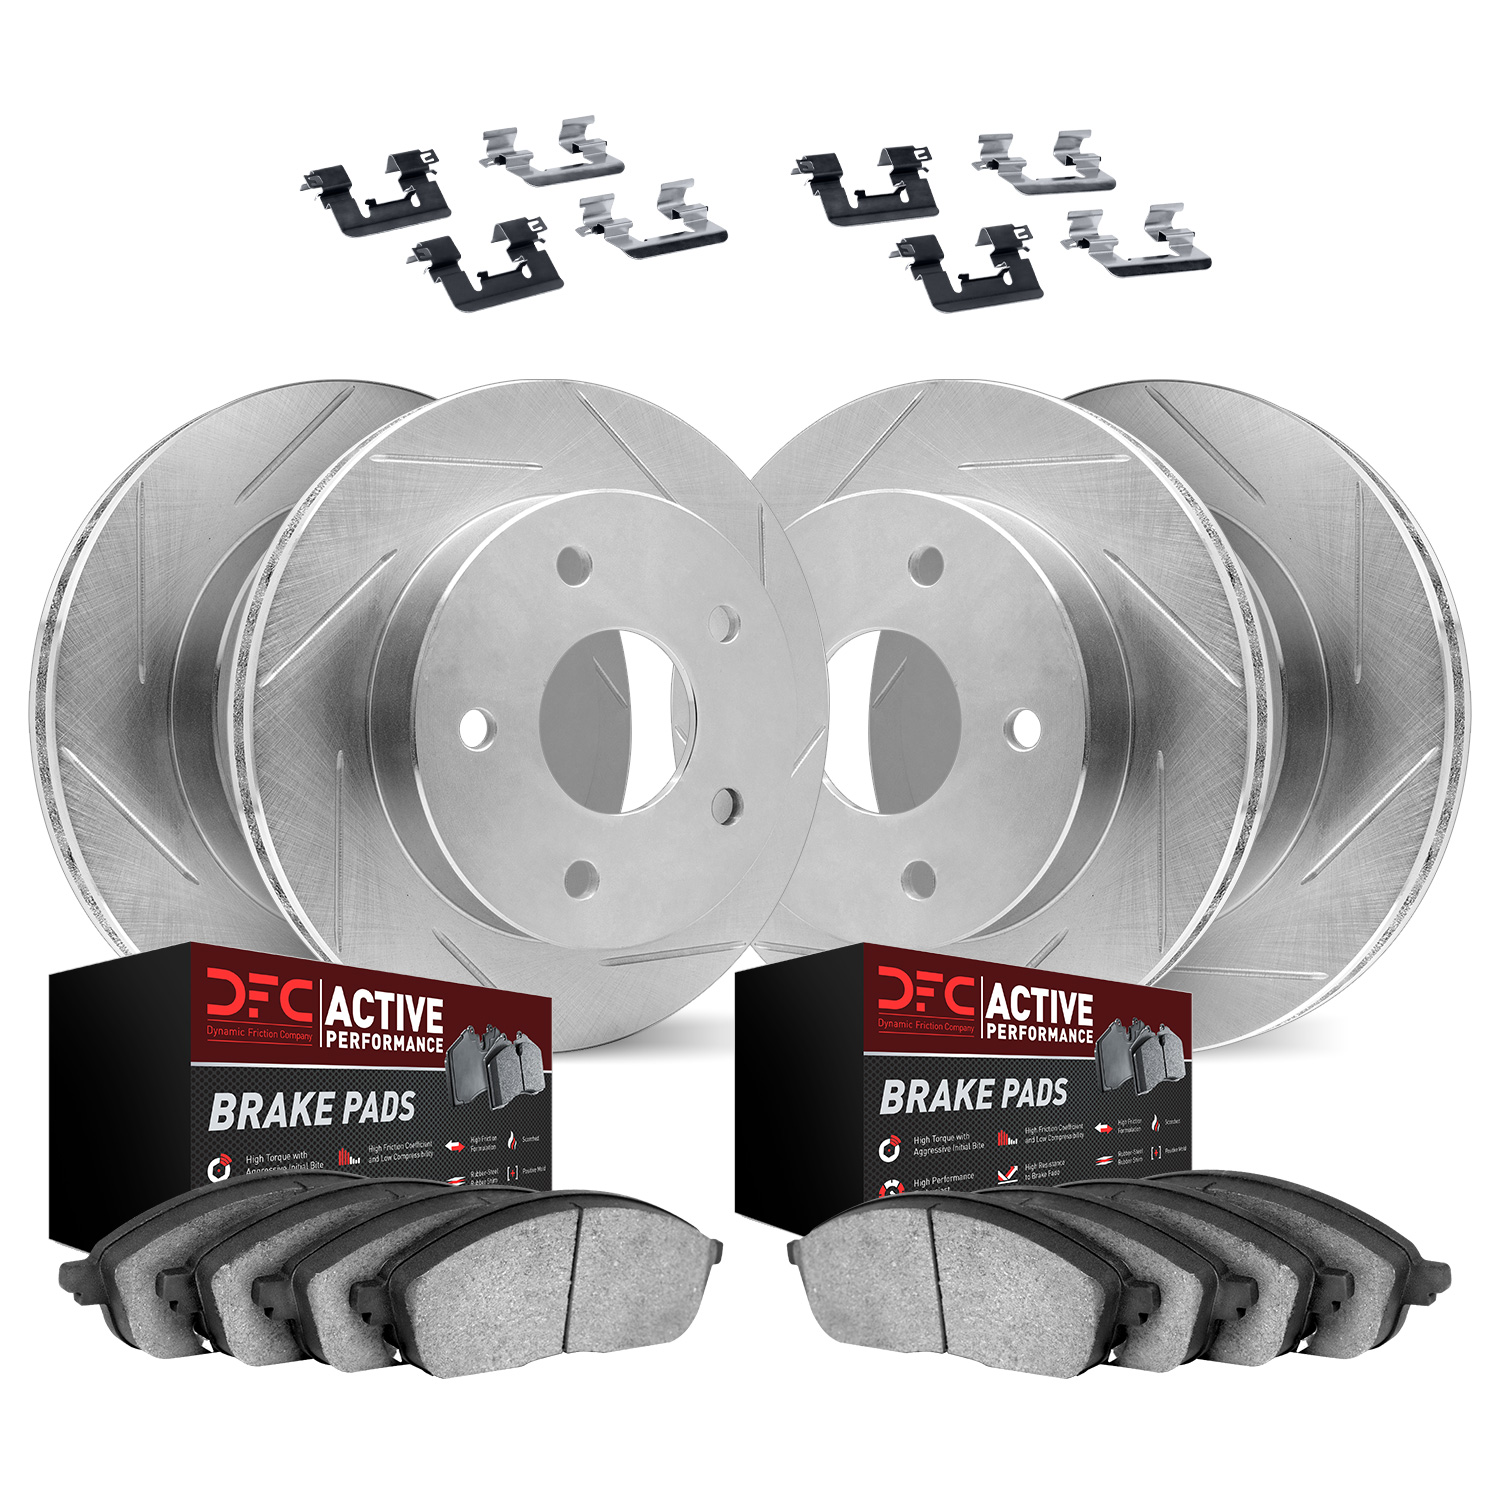 2714-31052 Geoperformance Slotted Brake Rotors with Active Performance Pads Kits & Hardware, 2001-2006 BMW, Position: Front and